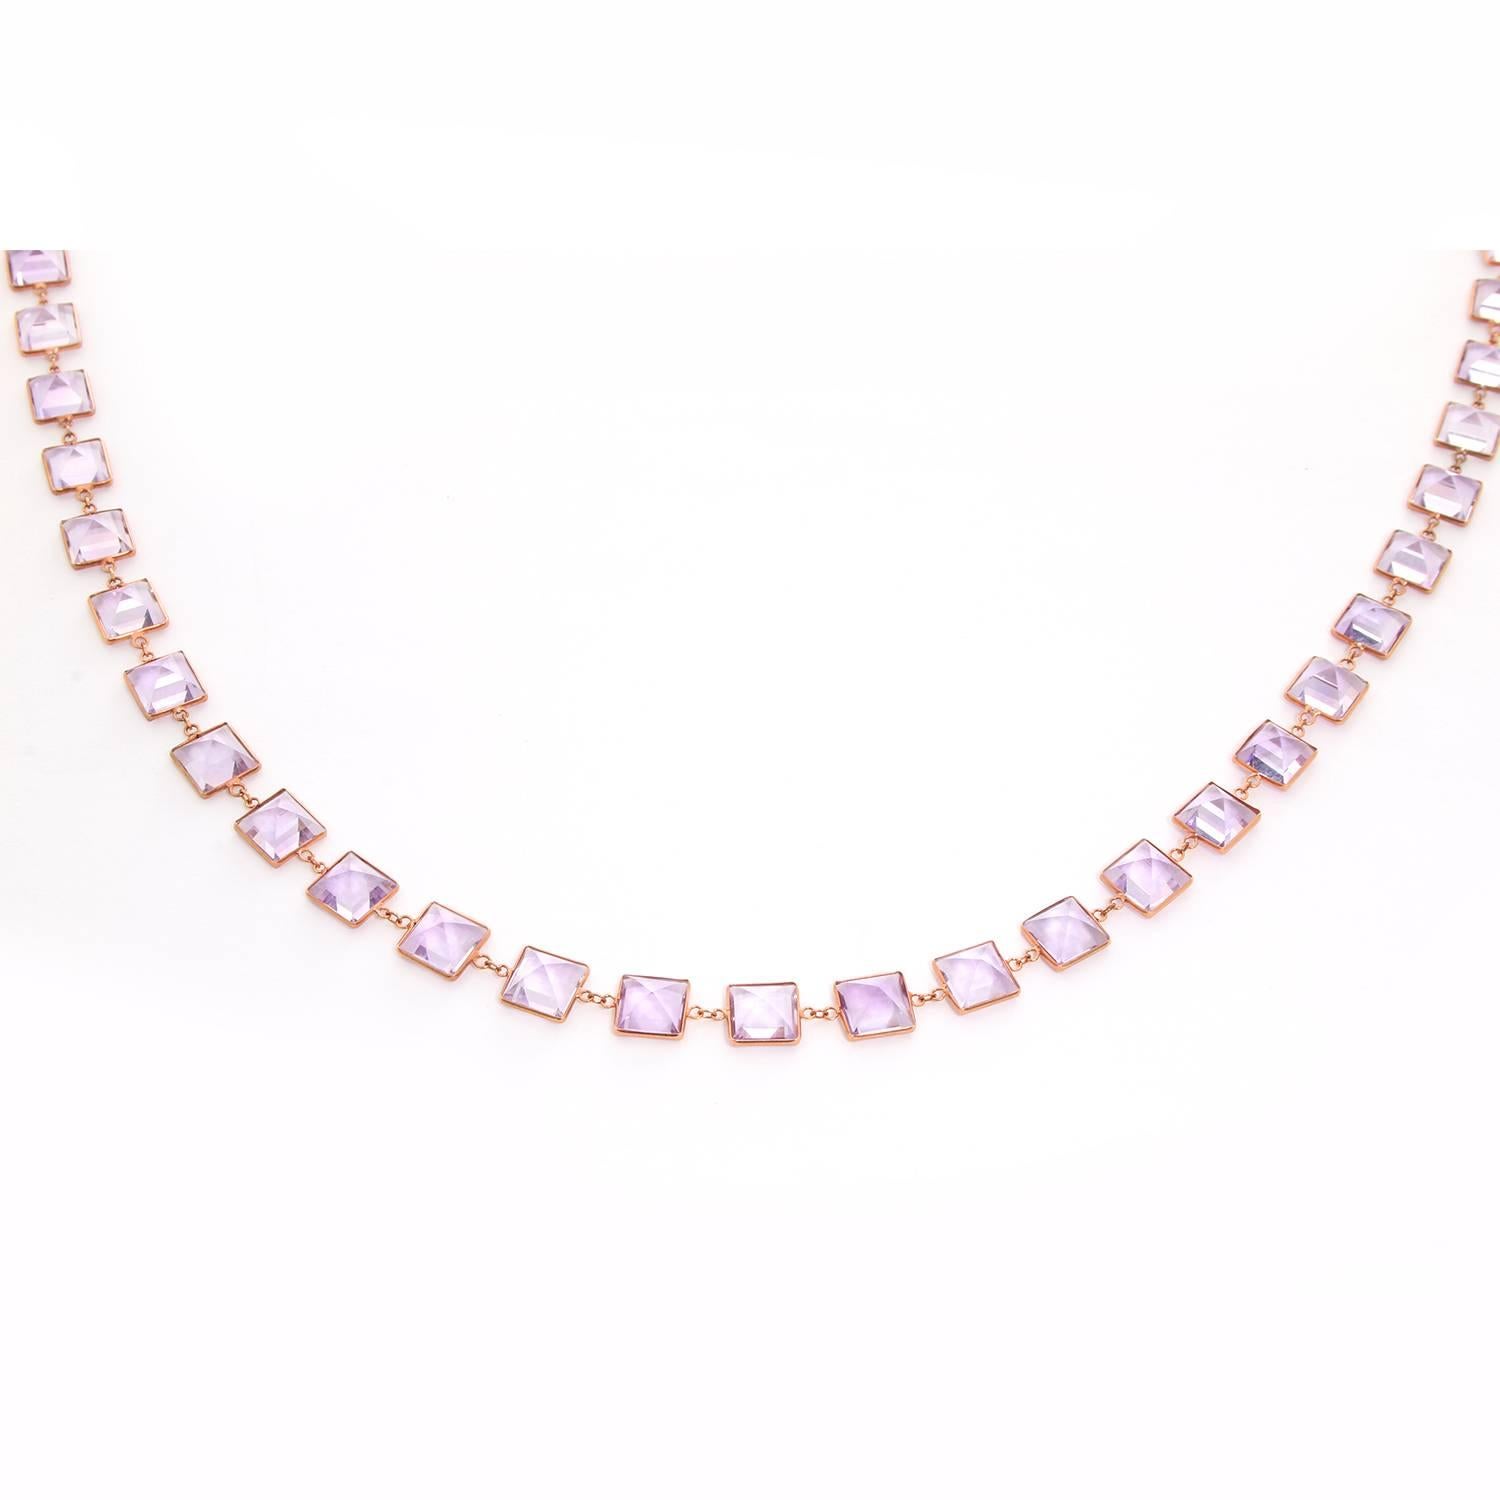 Chic 14K Rose Gold Pink Amethyst  by the Yard Necklace - . Beautiful 14K Rose Gold with square Pink Amethyst stones. Length 40 inches. Total weight 45 grams. Perfect to wear as a single strand or to double it around your neck!